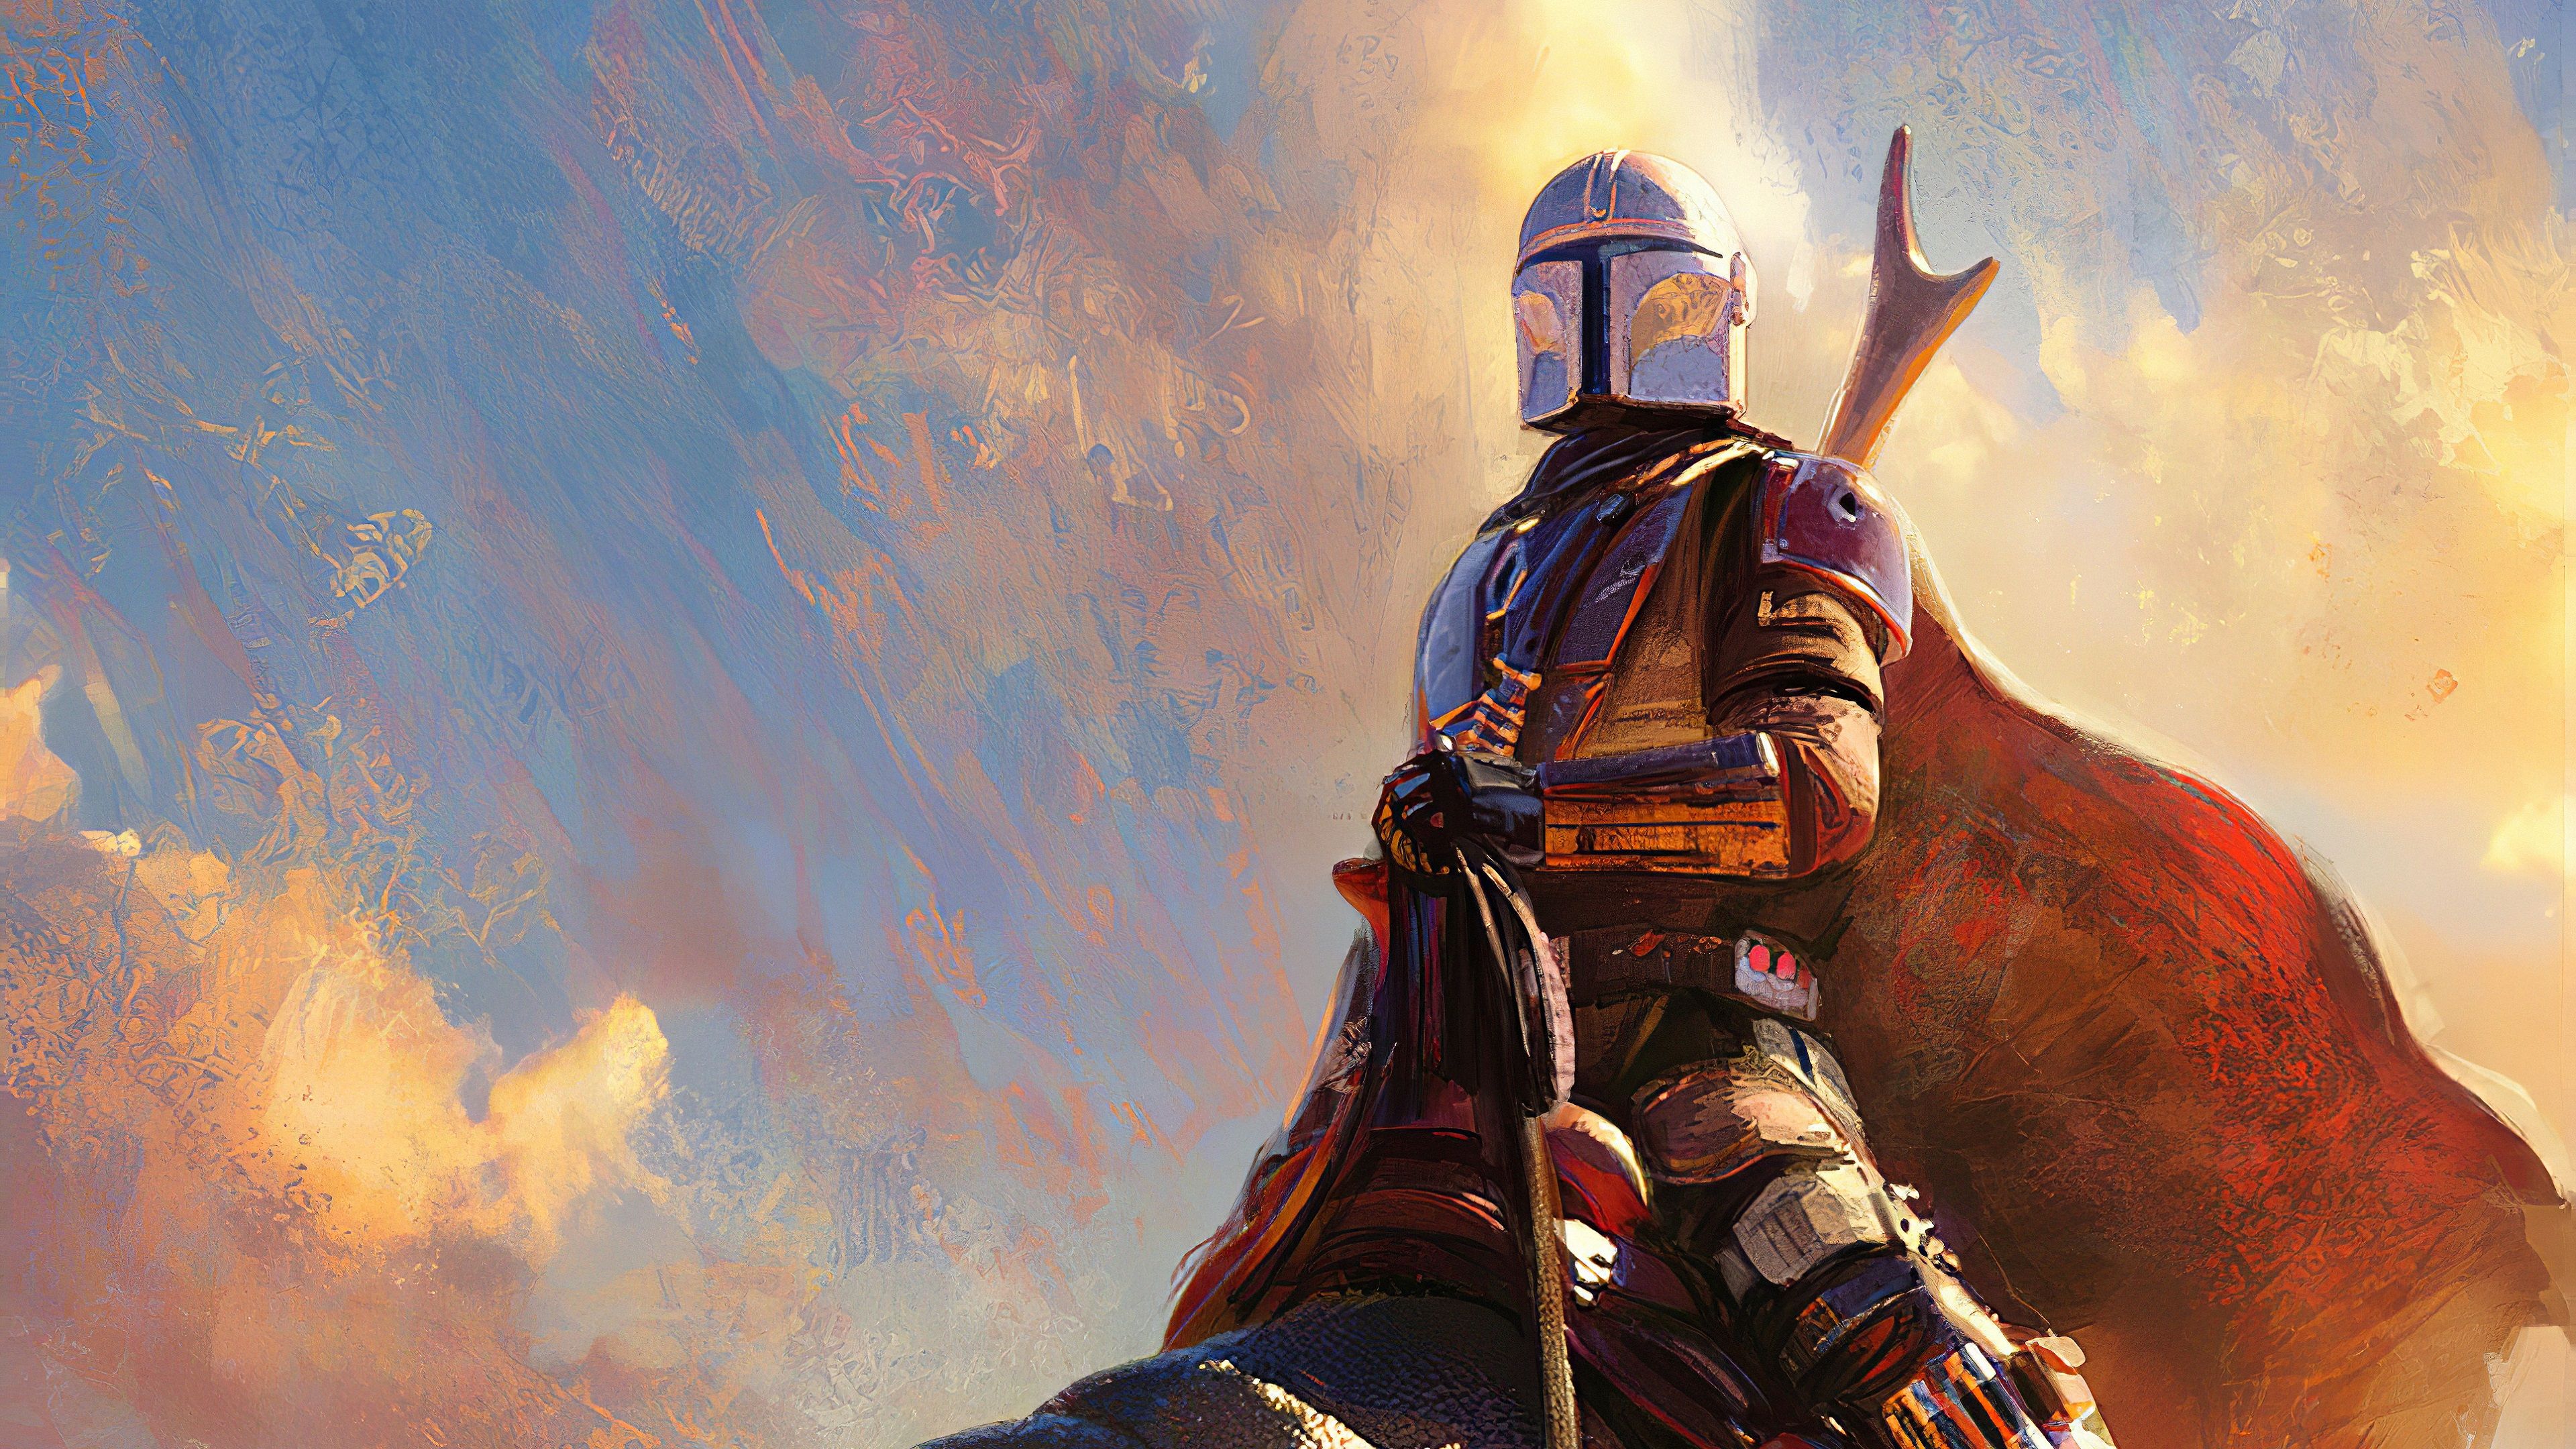 Mandalorian 4K wallpaper for your desktop or mobile screen free and easy to download